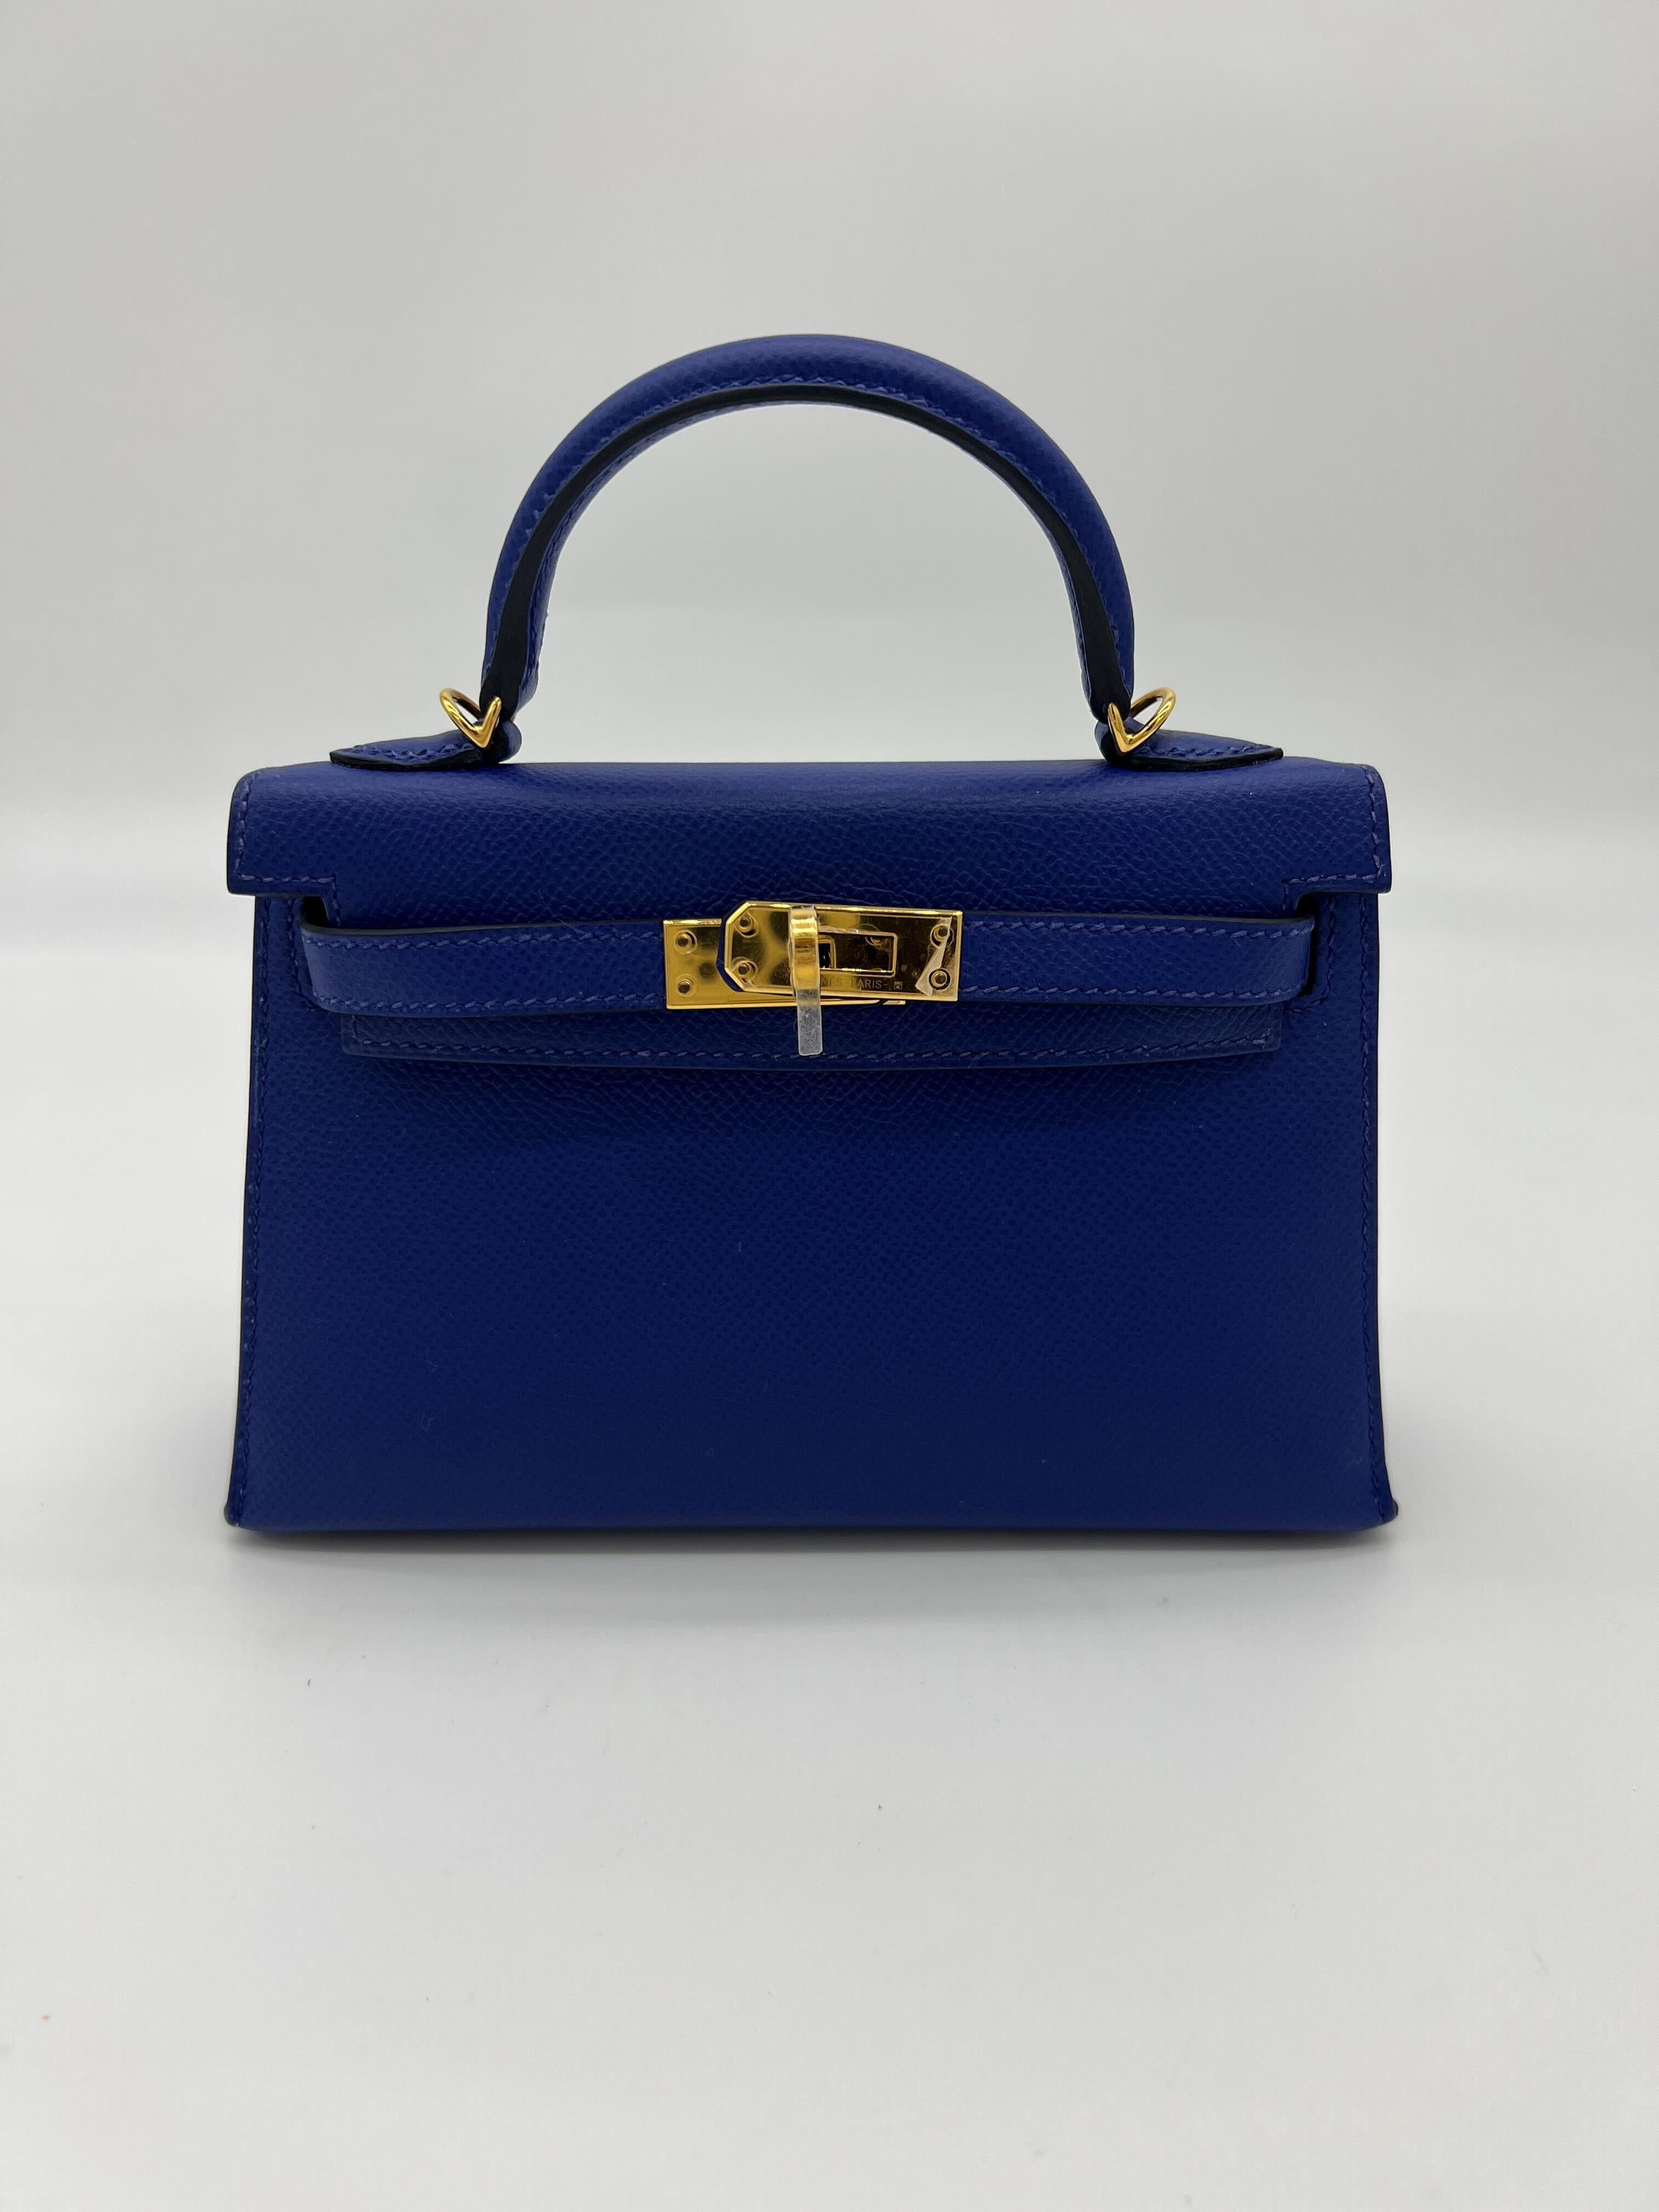 Hermes Kelly 20 Mini Bleu Electrique Veau Epsom Leather Gold Hardware

Condition: Pre-owned (like new)
Material: Epsom Leather
Measuremeants: 20cm x 16cm x 10cm
Hardware: Gold


*Comes with original packaging, missing receipt and box.